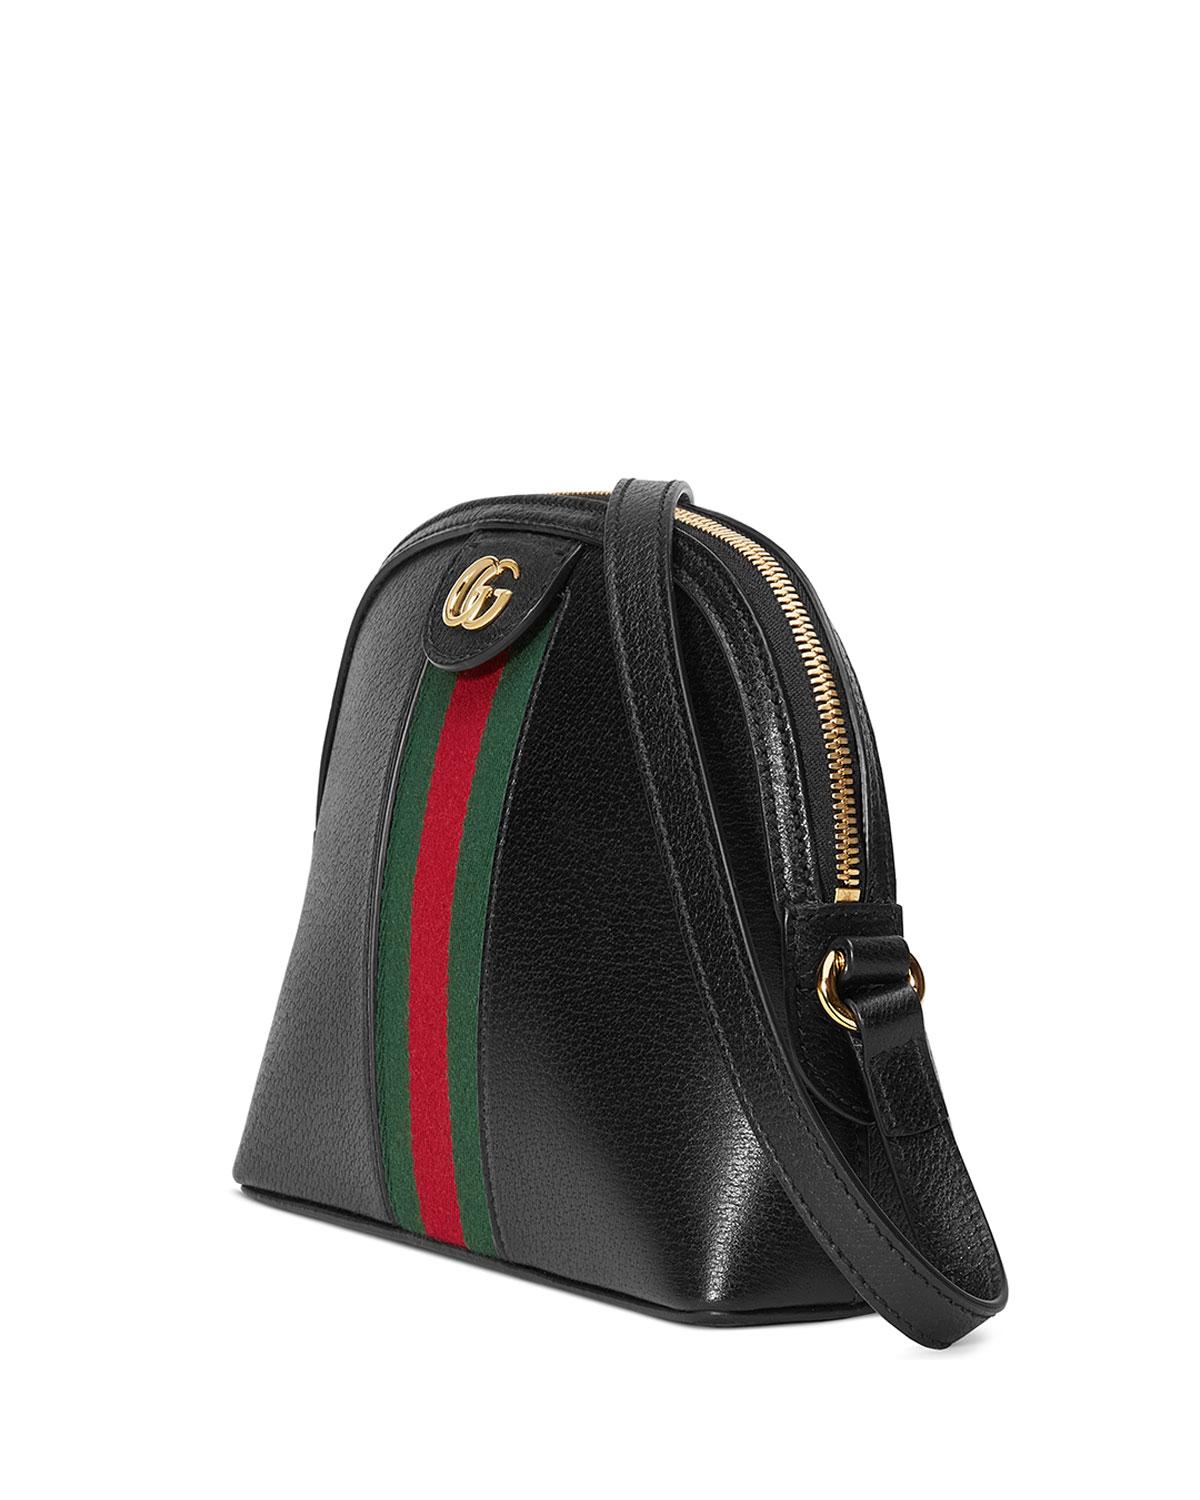 Gucci Ophidia Small Shoulder Bag in Black - Lyst